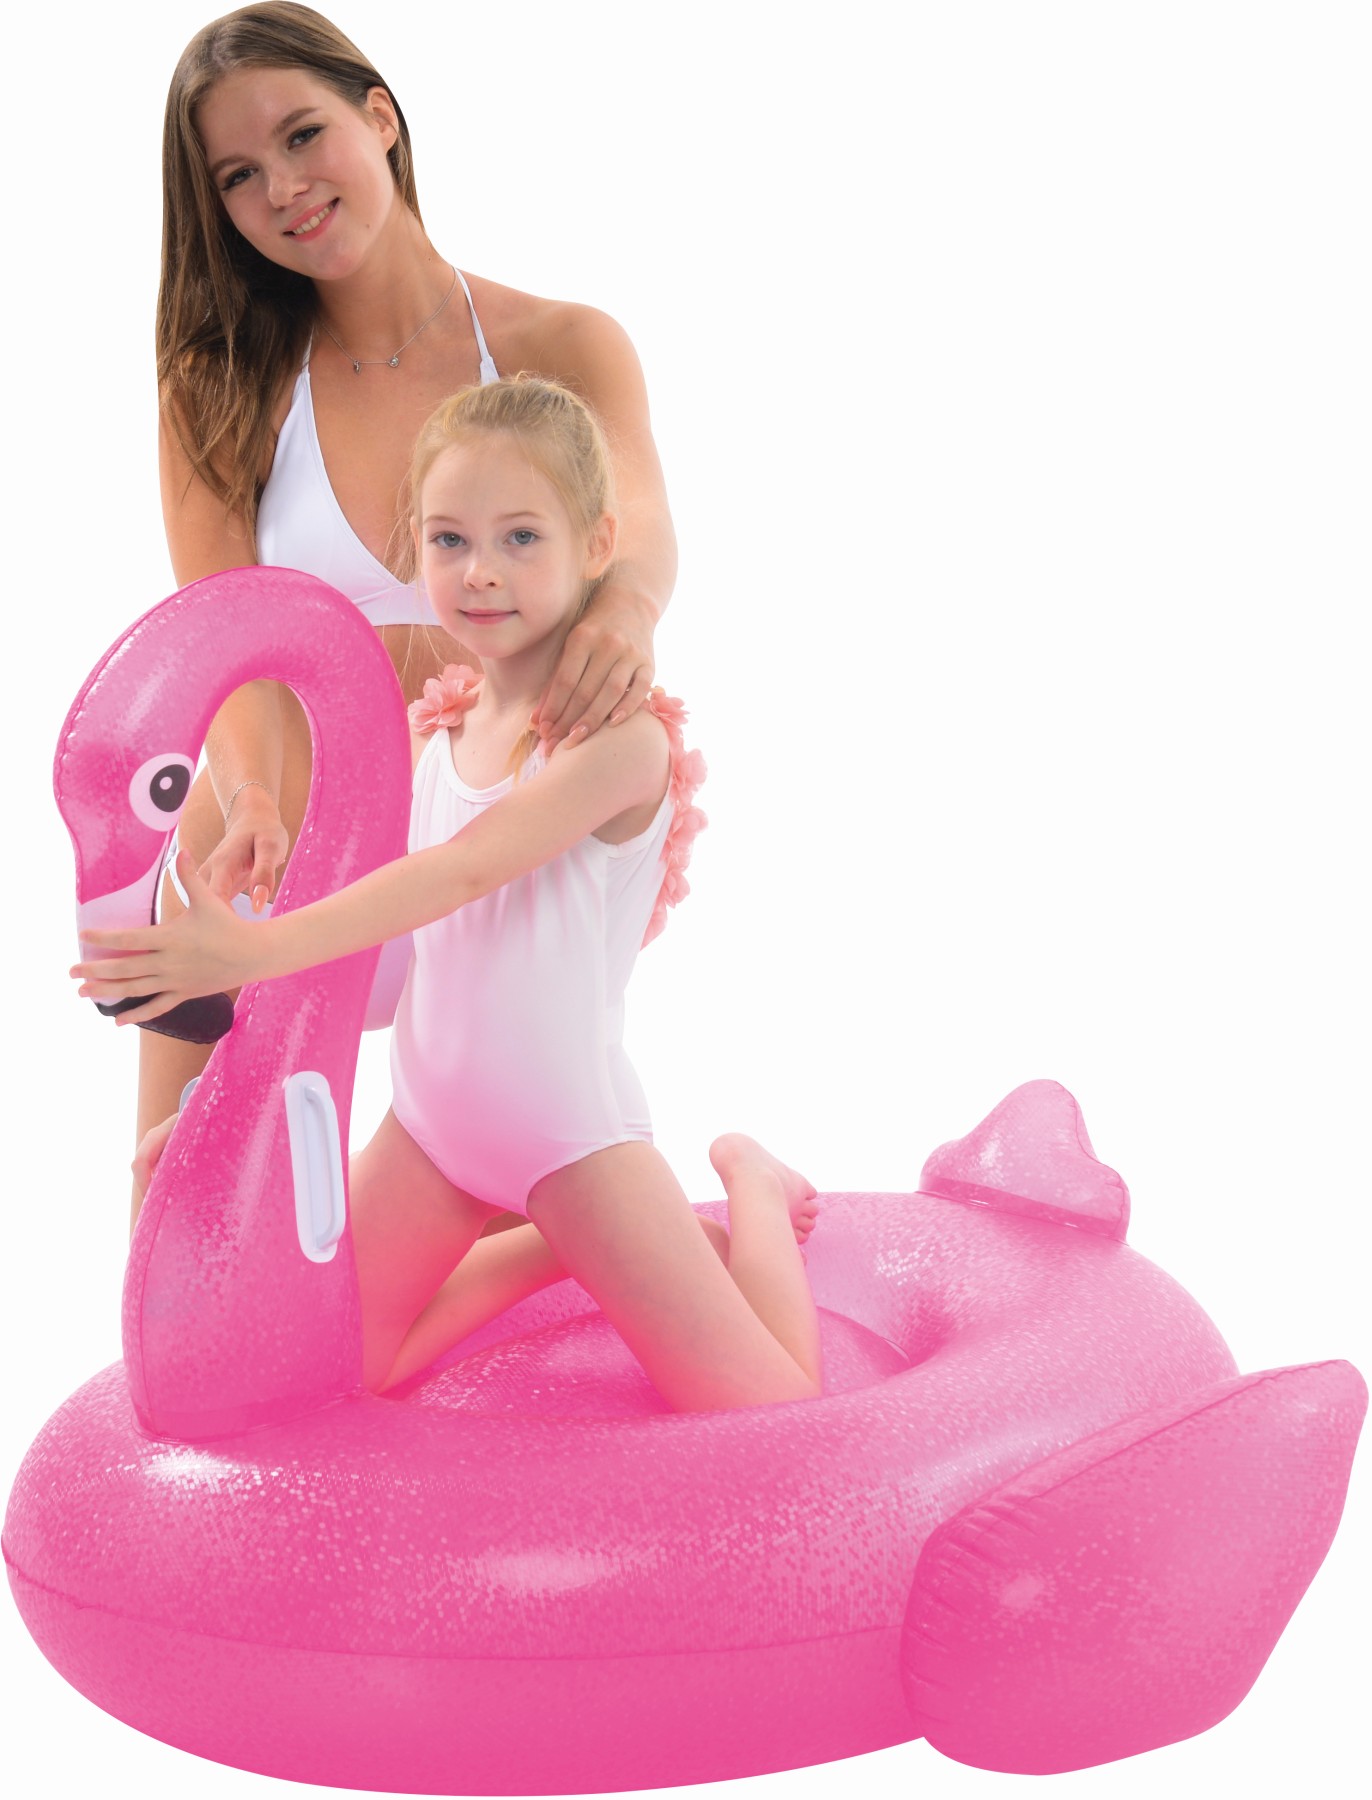 Inflatable pool float